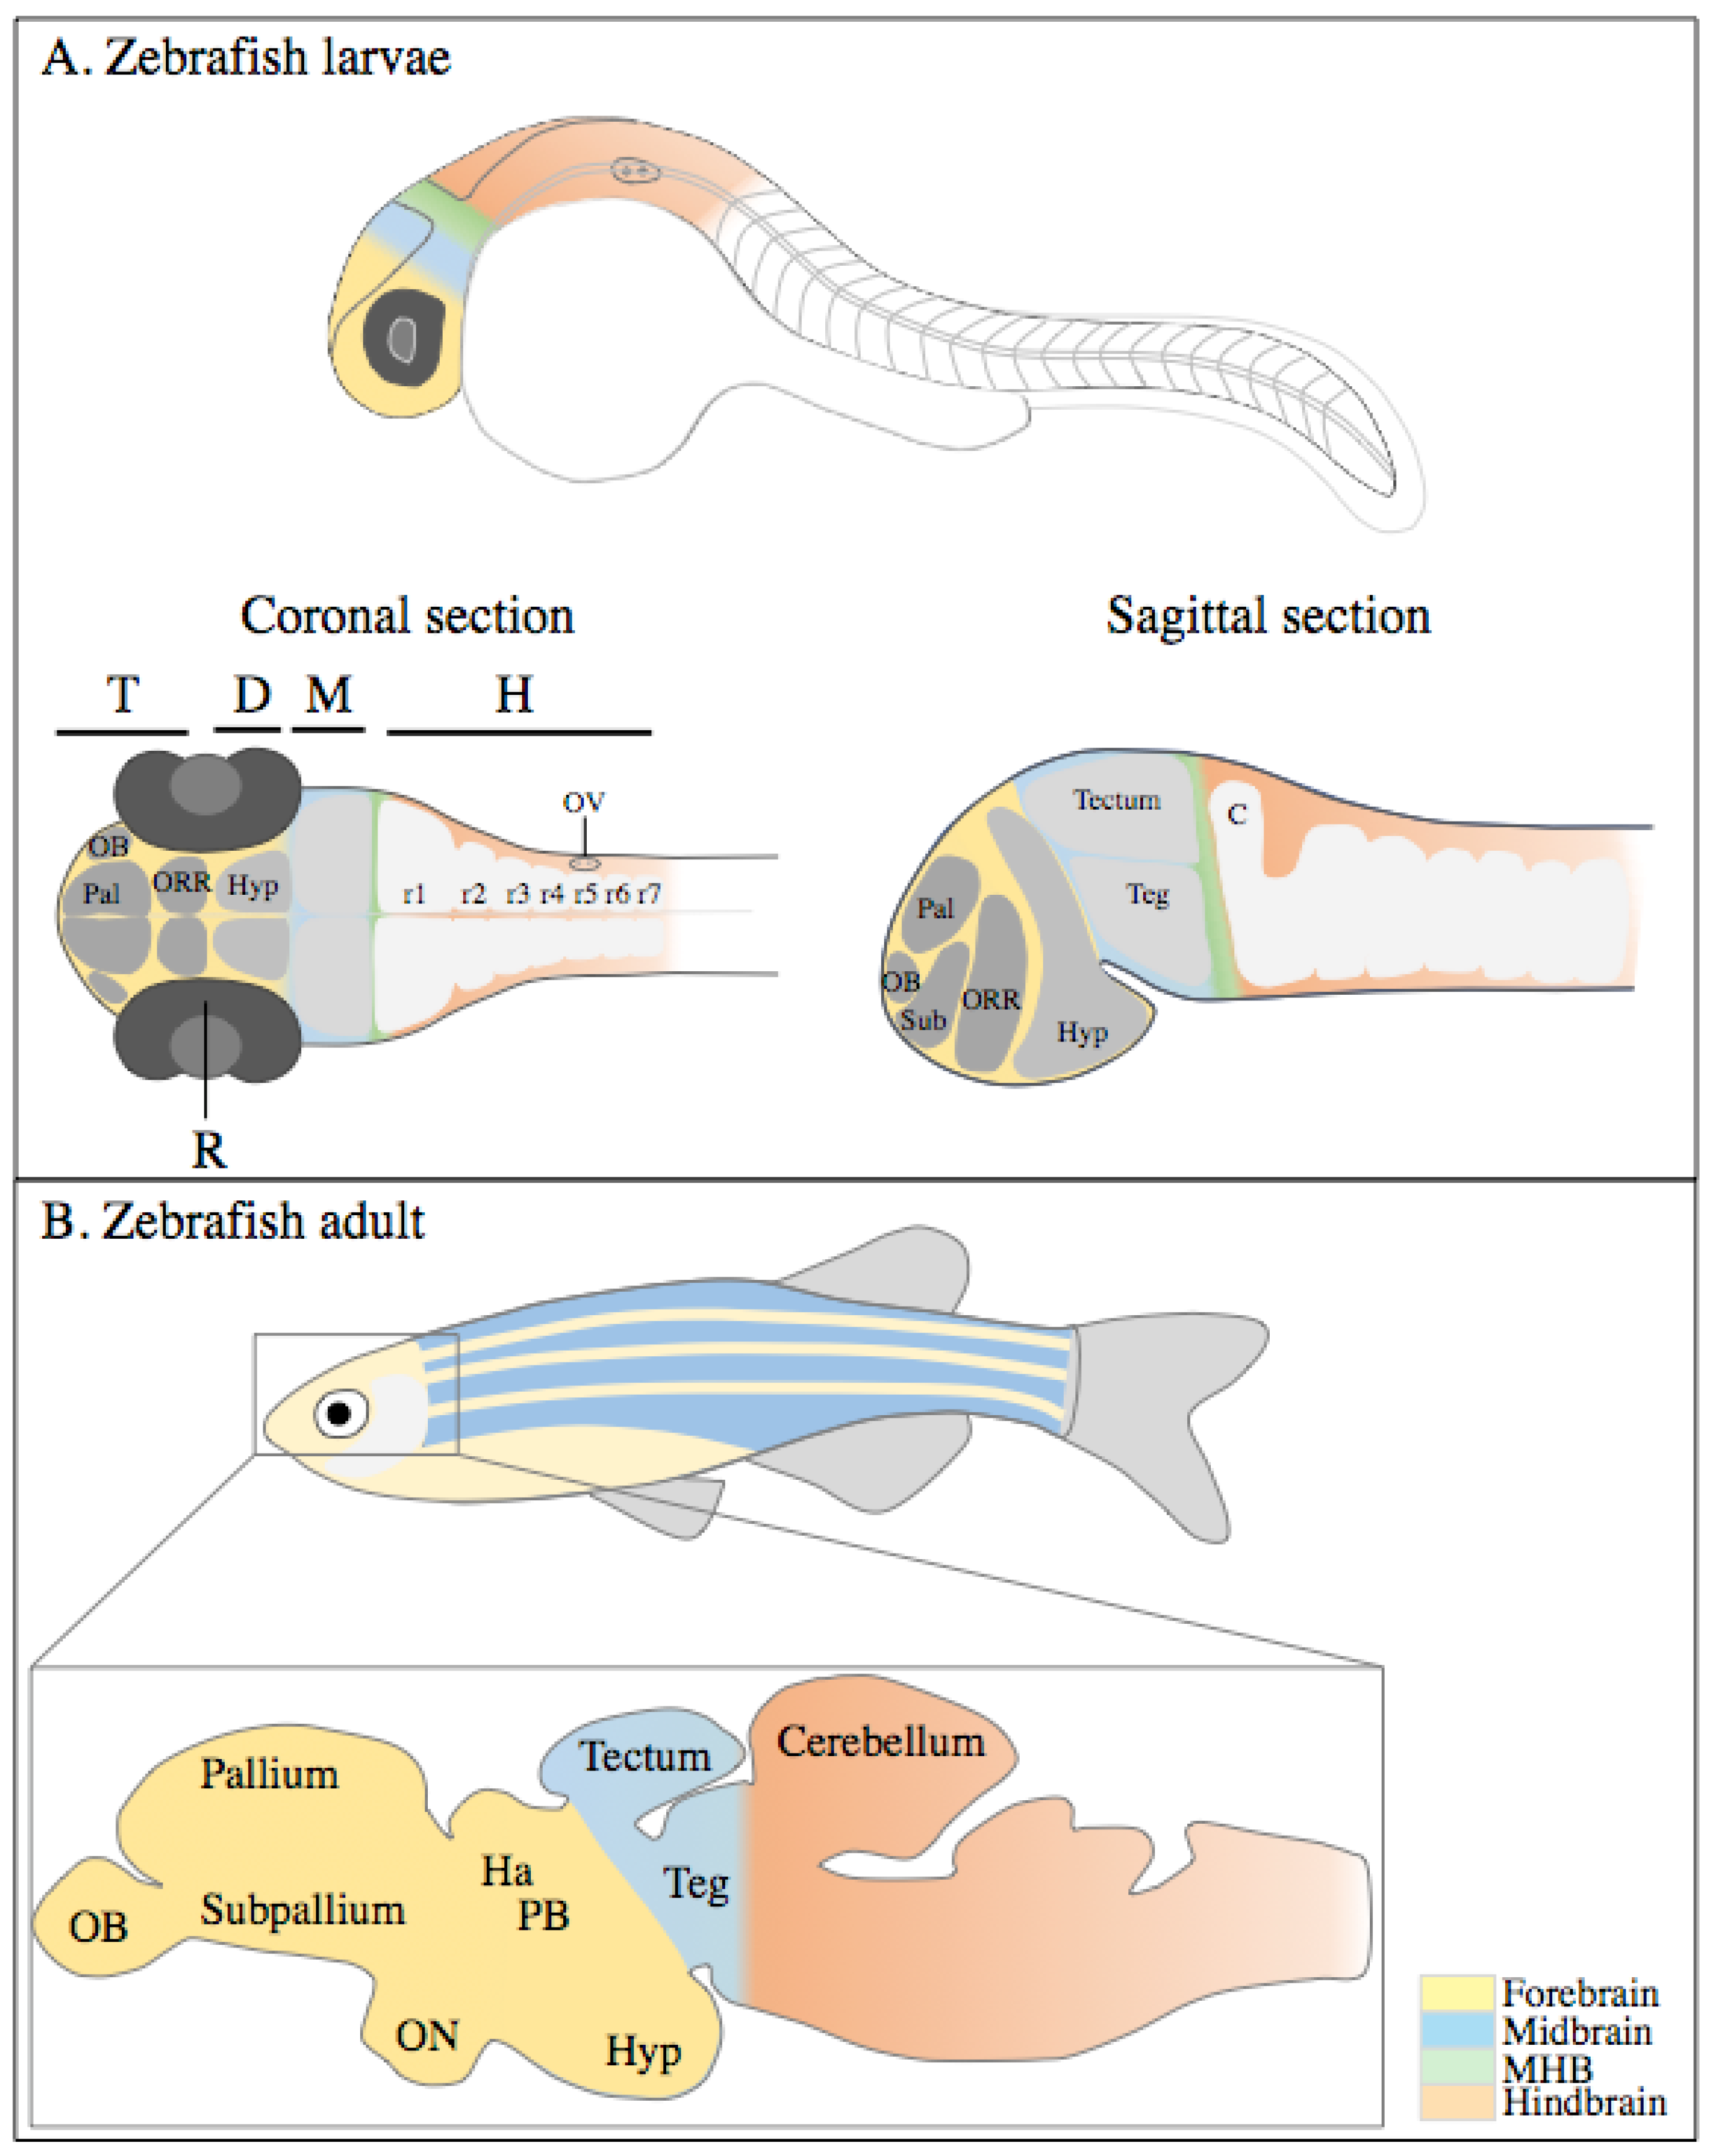 IJMS | Free Full-Text | Zebrafish Models of Neurodevelopmental Disorders:  Limitations and Benefits of Current Tools and Techniques